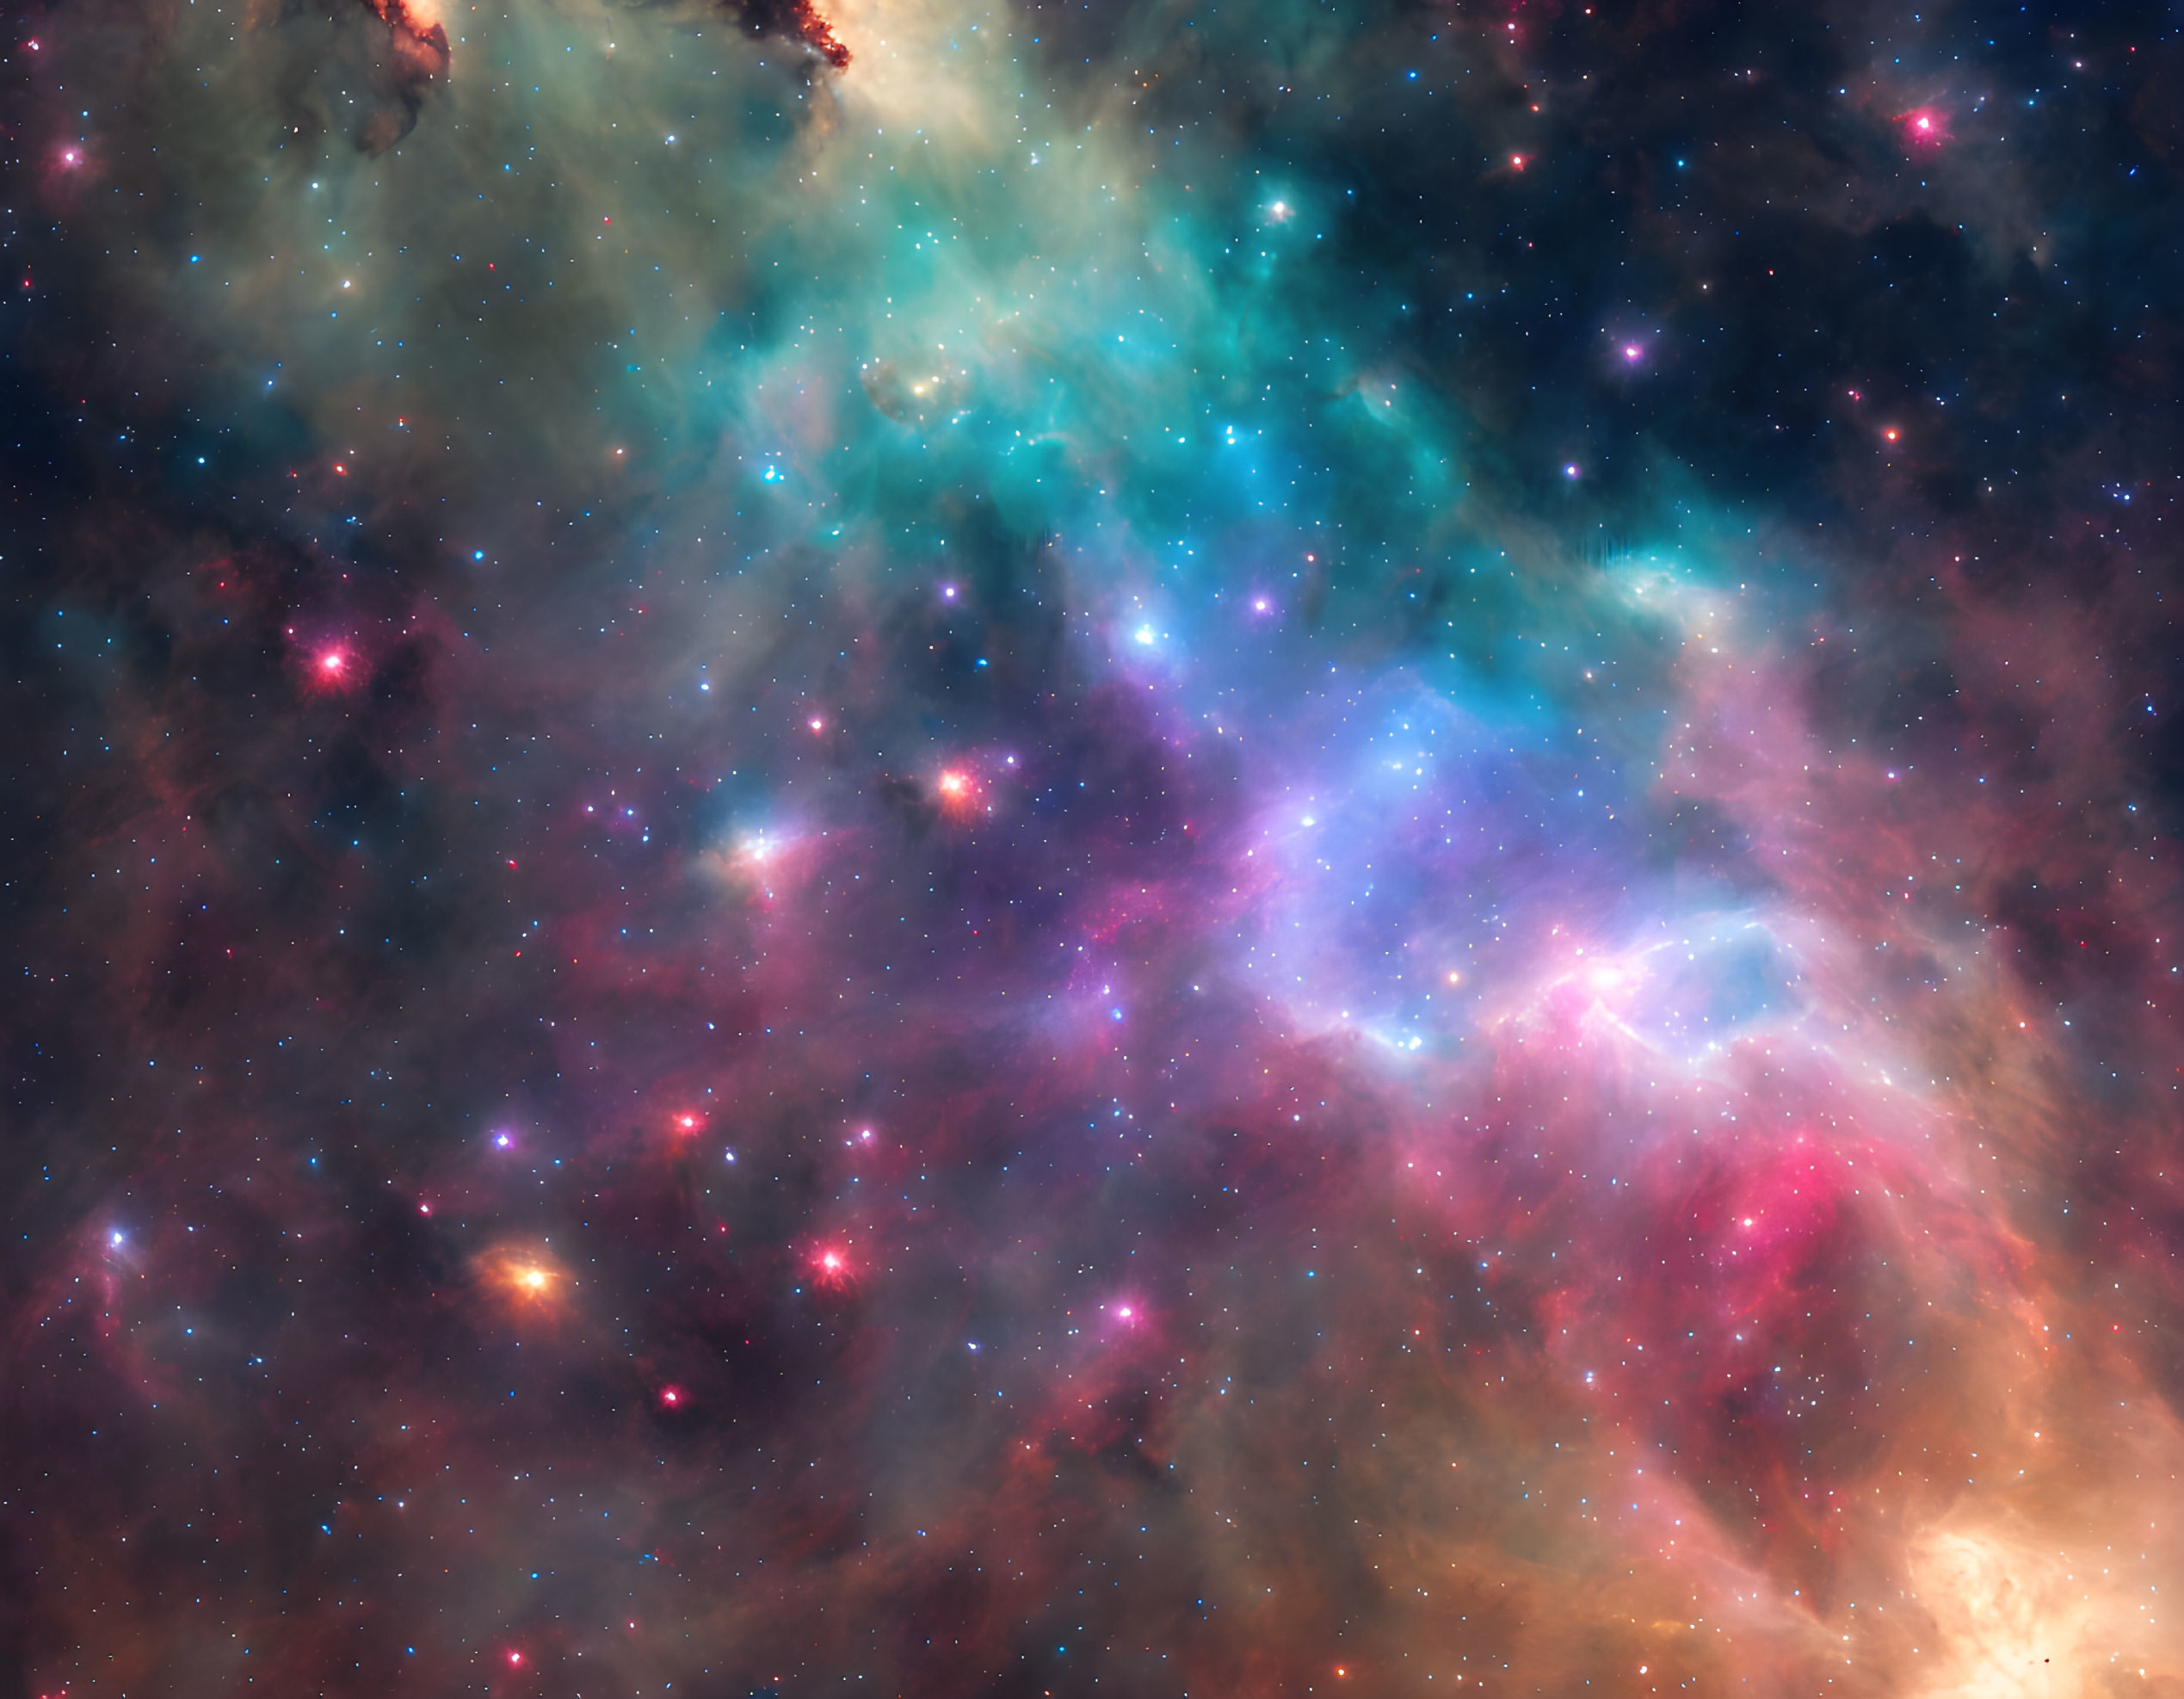 Colorful Cosmic Scene with Blues, Pinks, and Purples